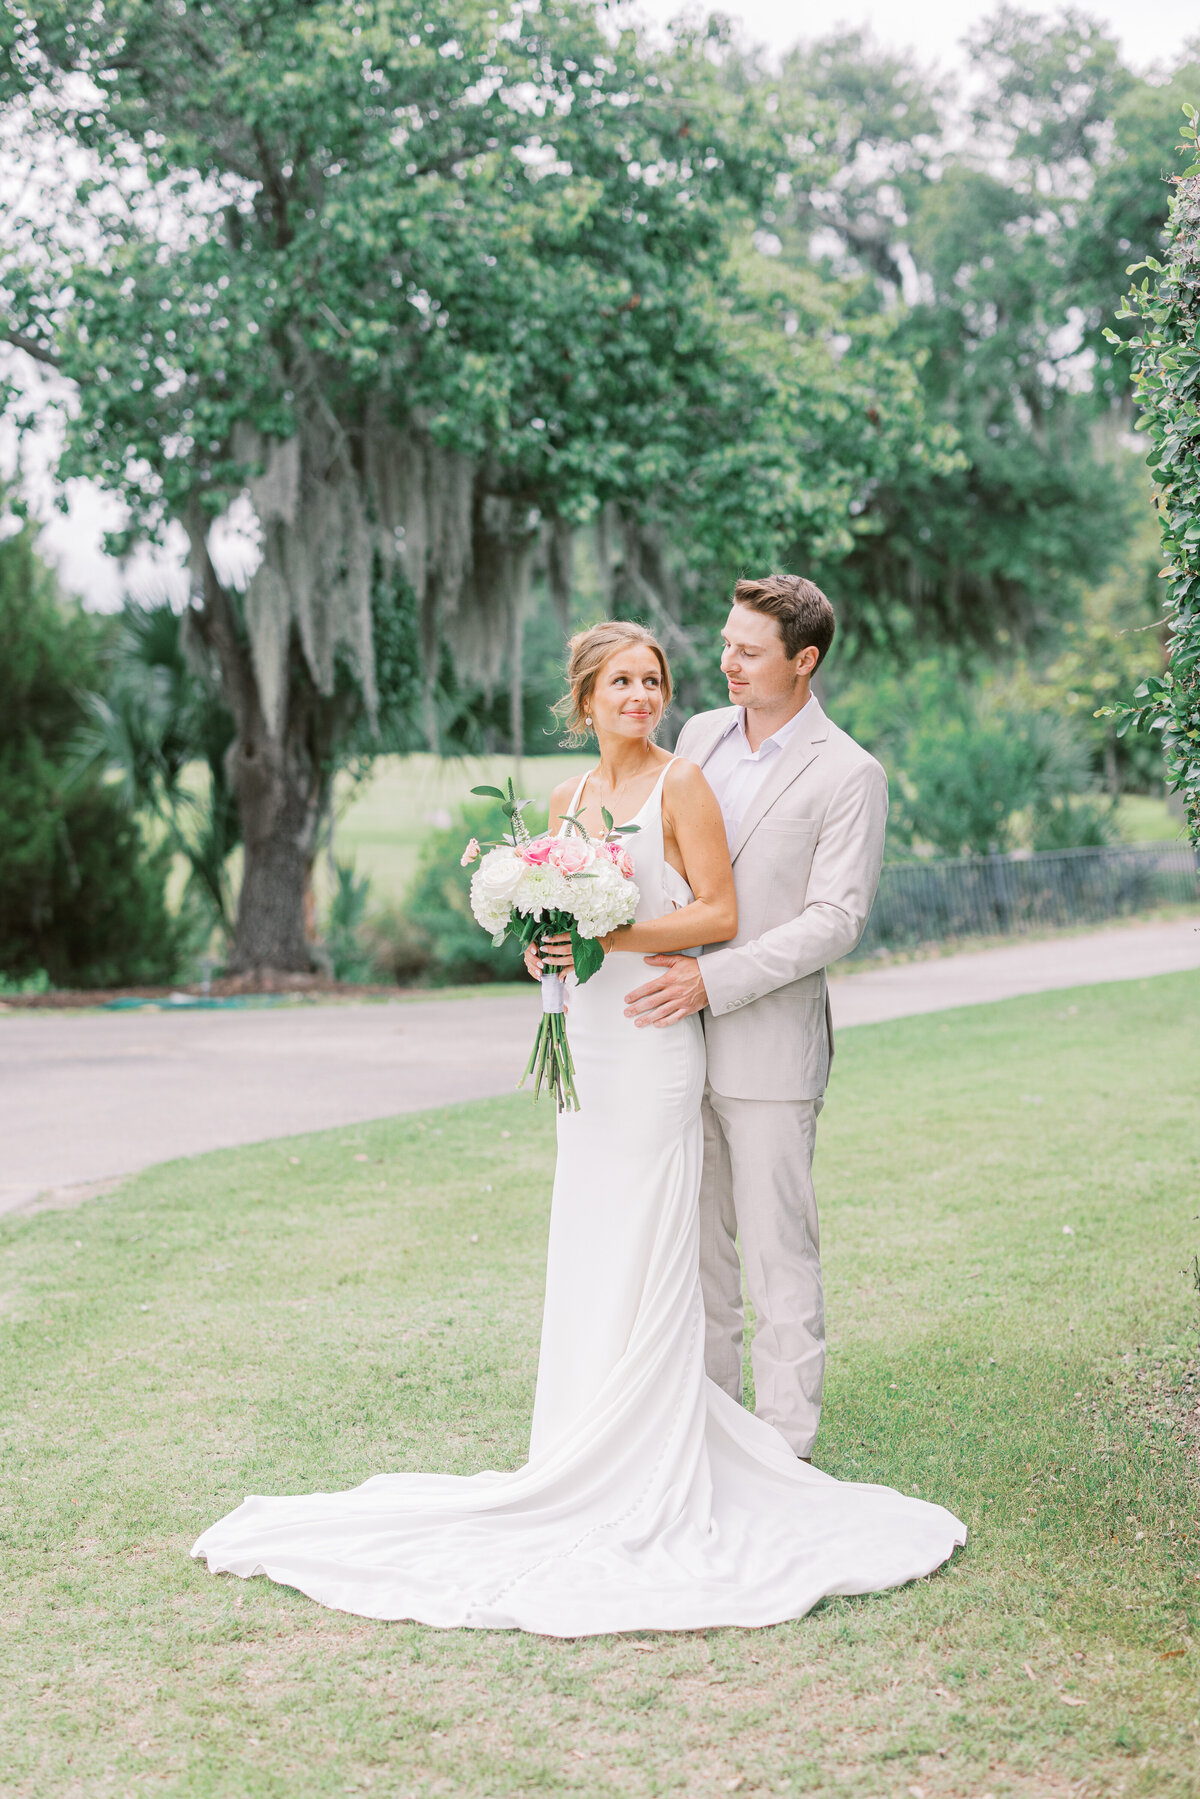 Snuggling bride and groom at their charleston wedding